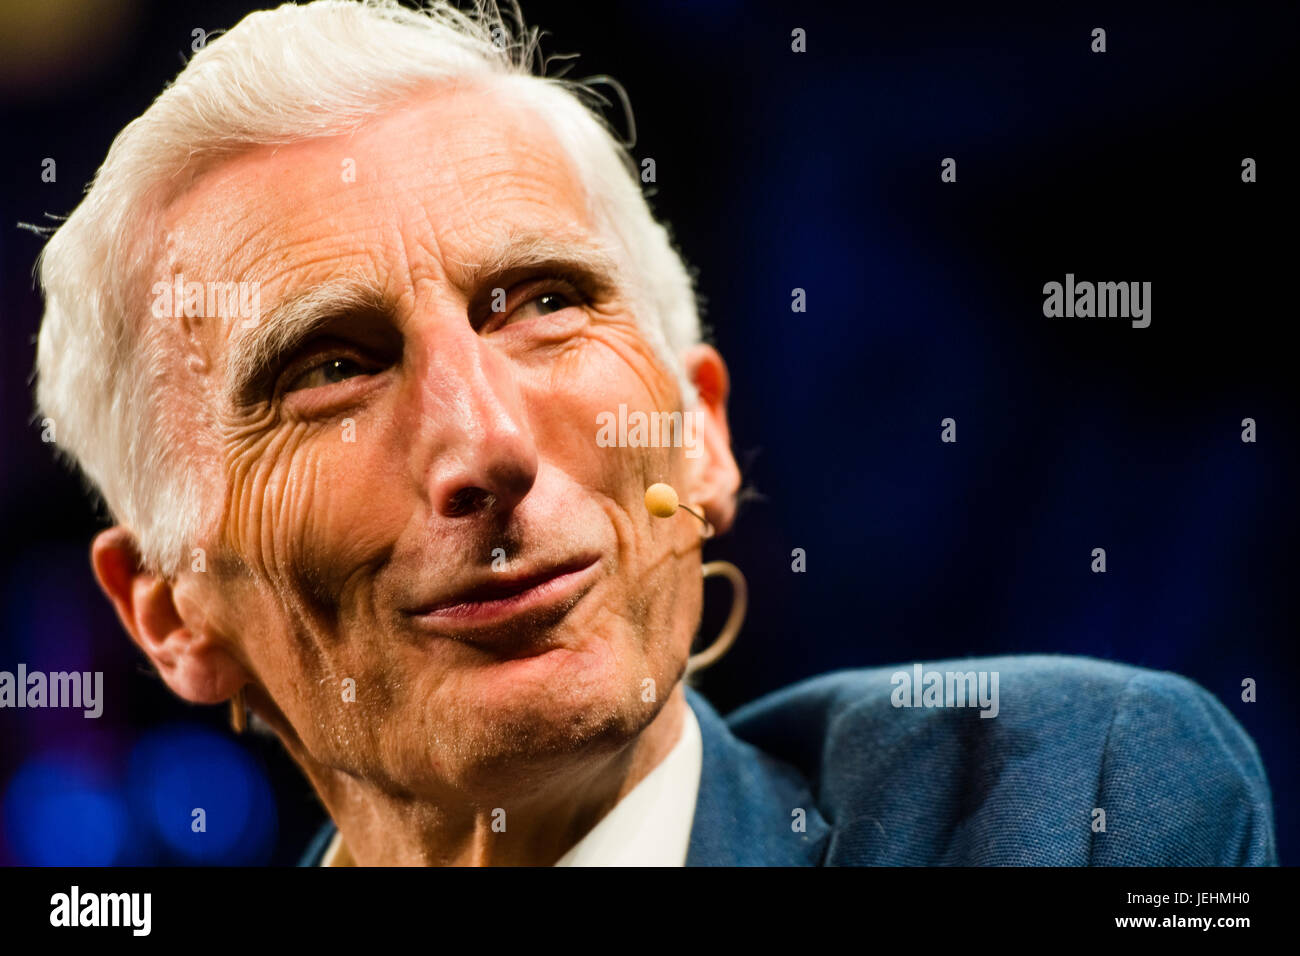 Martin Rees  , Baron Rees of Ludlow, OM, FRS, FREng, FMedSci, FRAS , British cosmologist and astrophysicist,  appearing at the 2017 Hay Festival of Literature and the Arts, Hay on Wye, Wales UK Stock Photo